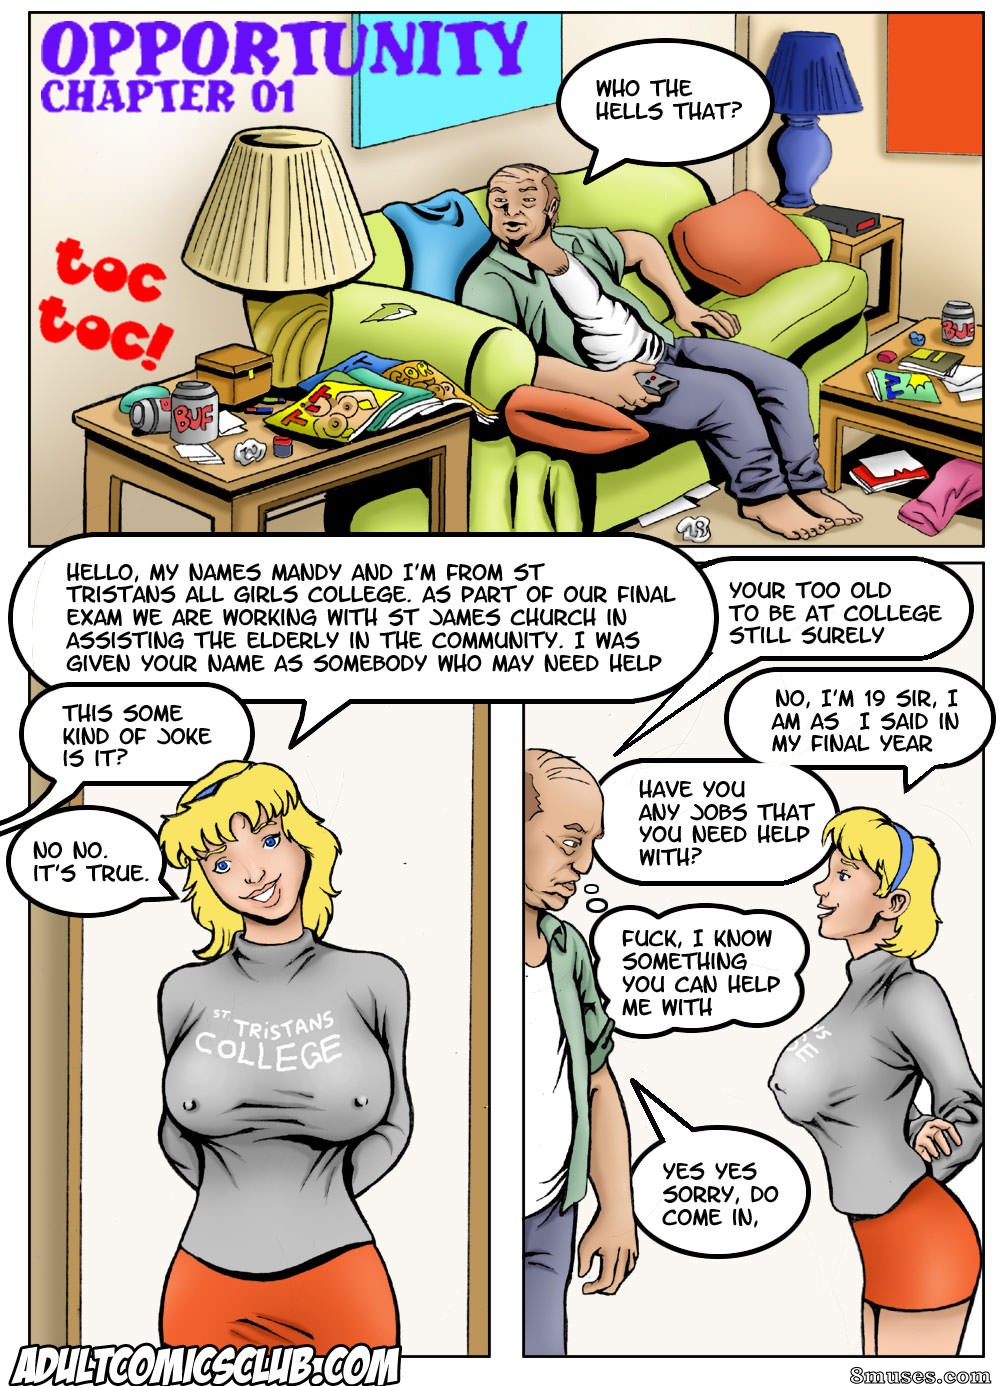 Old Comic Book Porn - Old Mans Opportunity - 8muses Comics - Sex Comics and Porn Cartoons